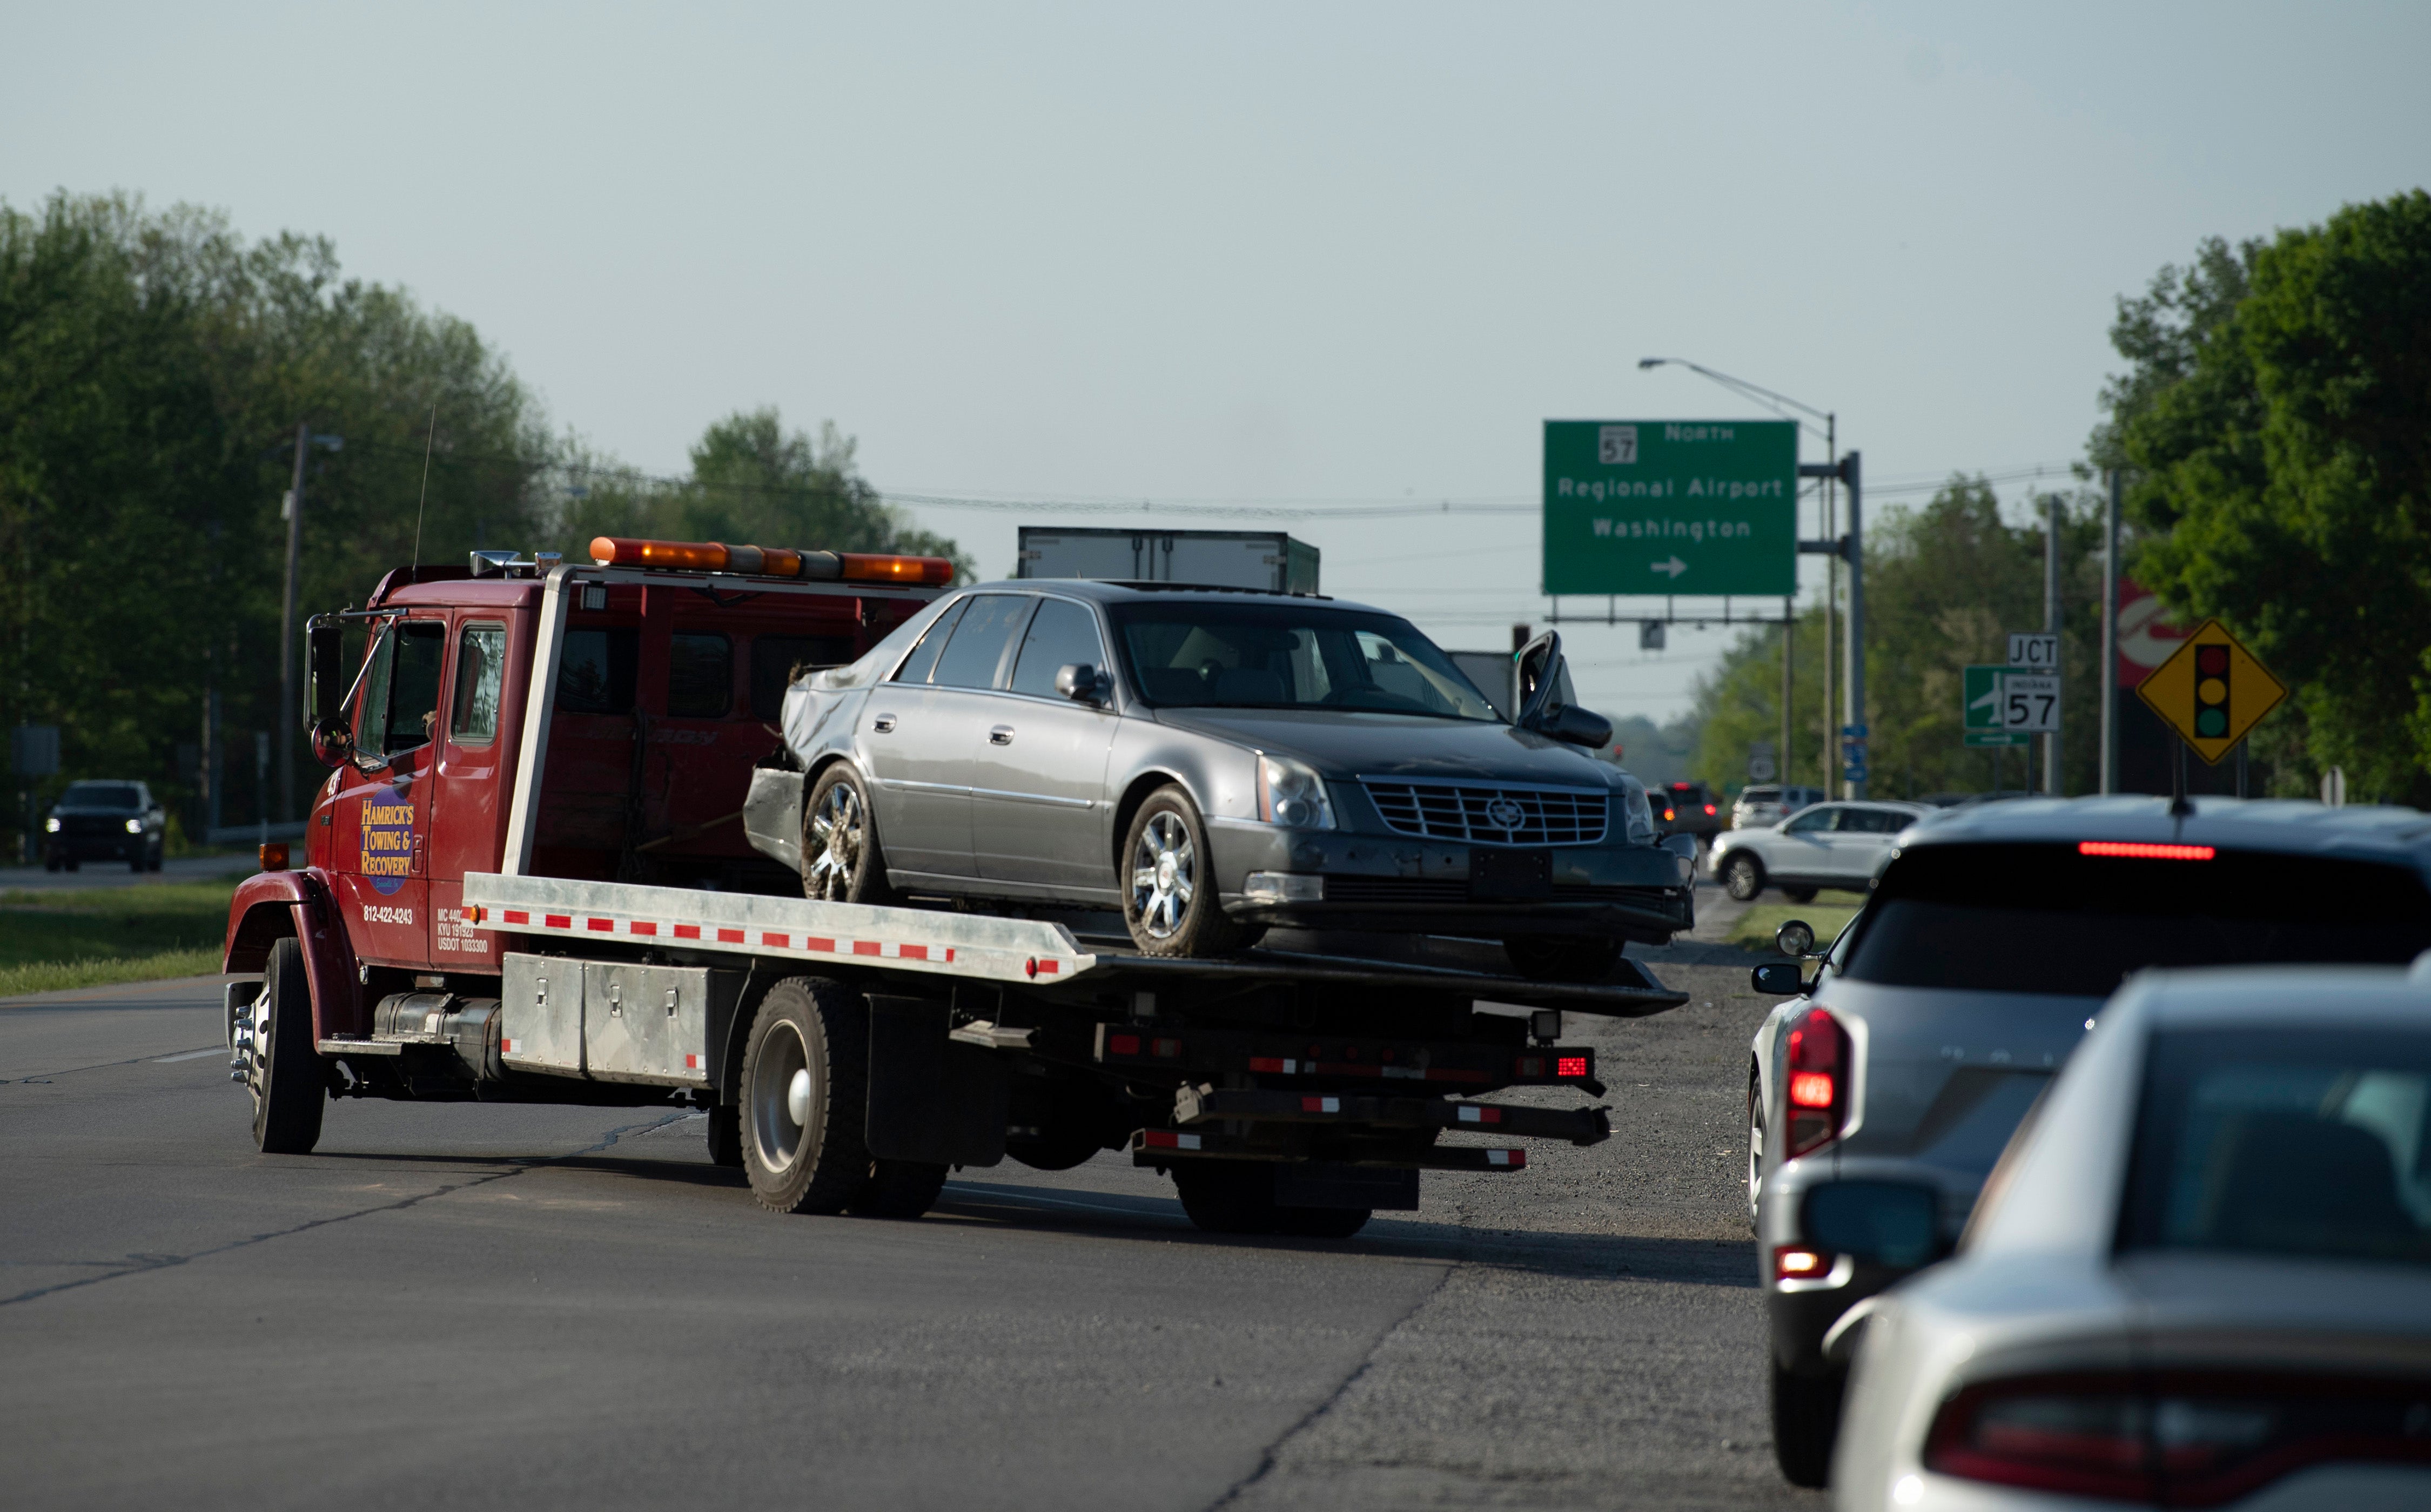 The cadillac is towed away following Monday’s car chase